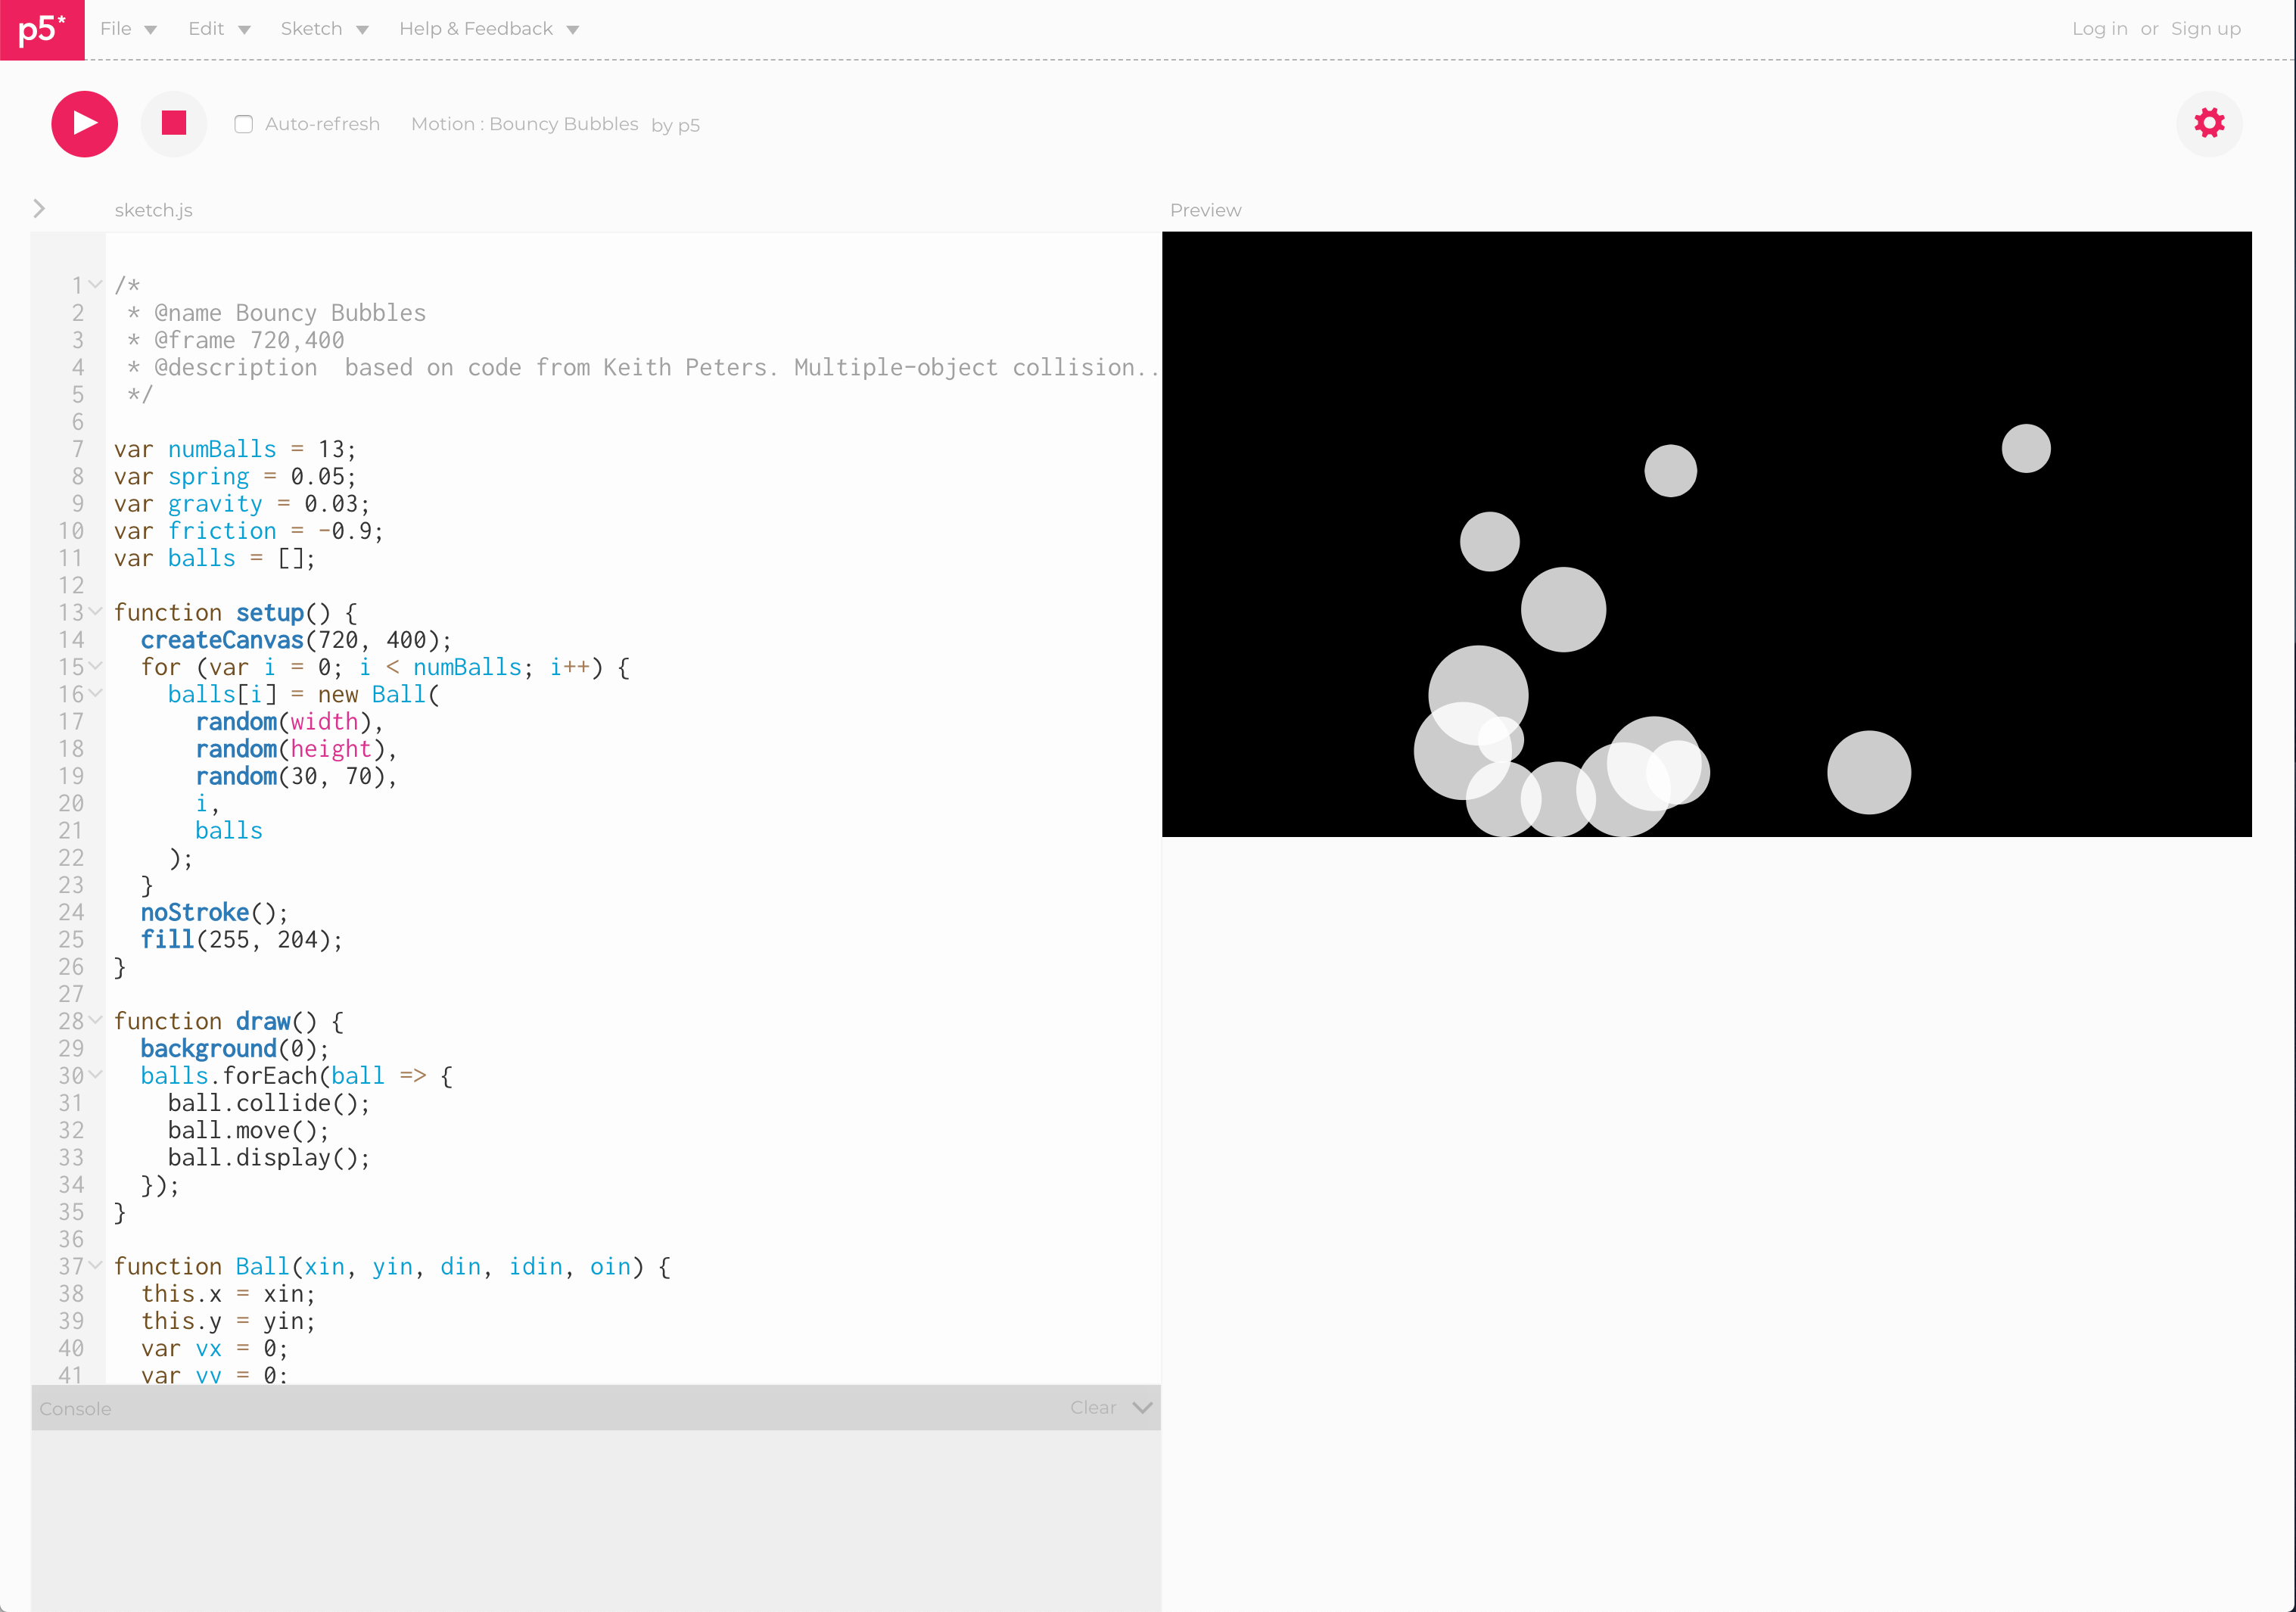 p5_js_Web_Editor___Motion___Bouncy_Bubbles_and_All_Notes.png